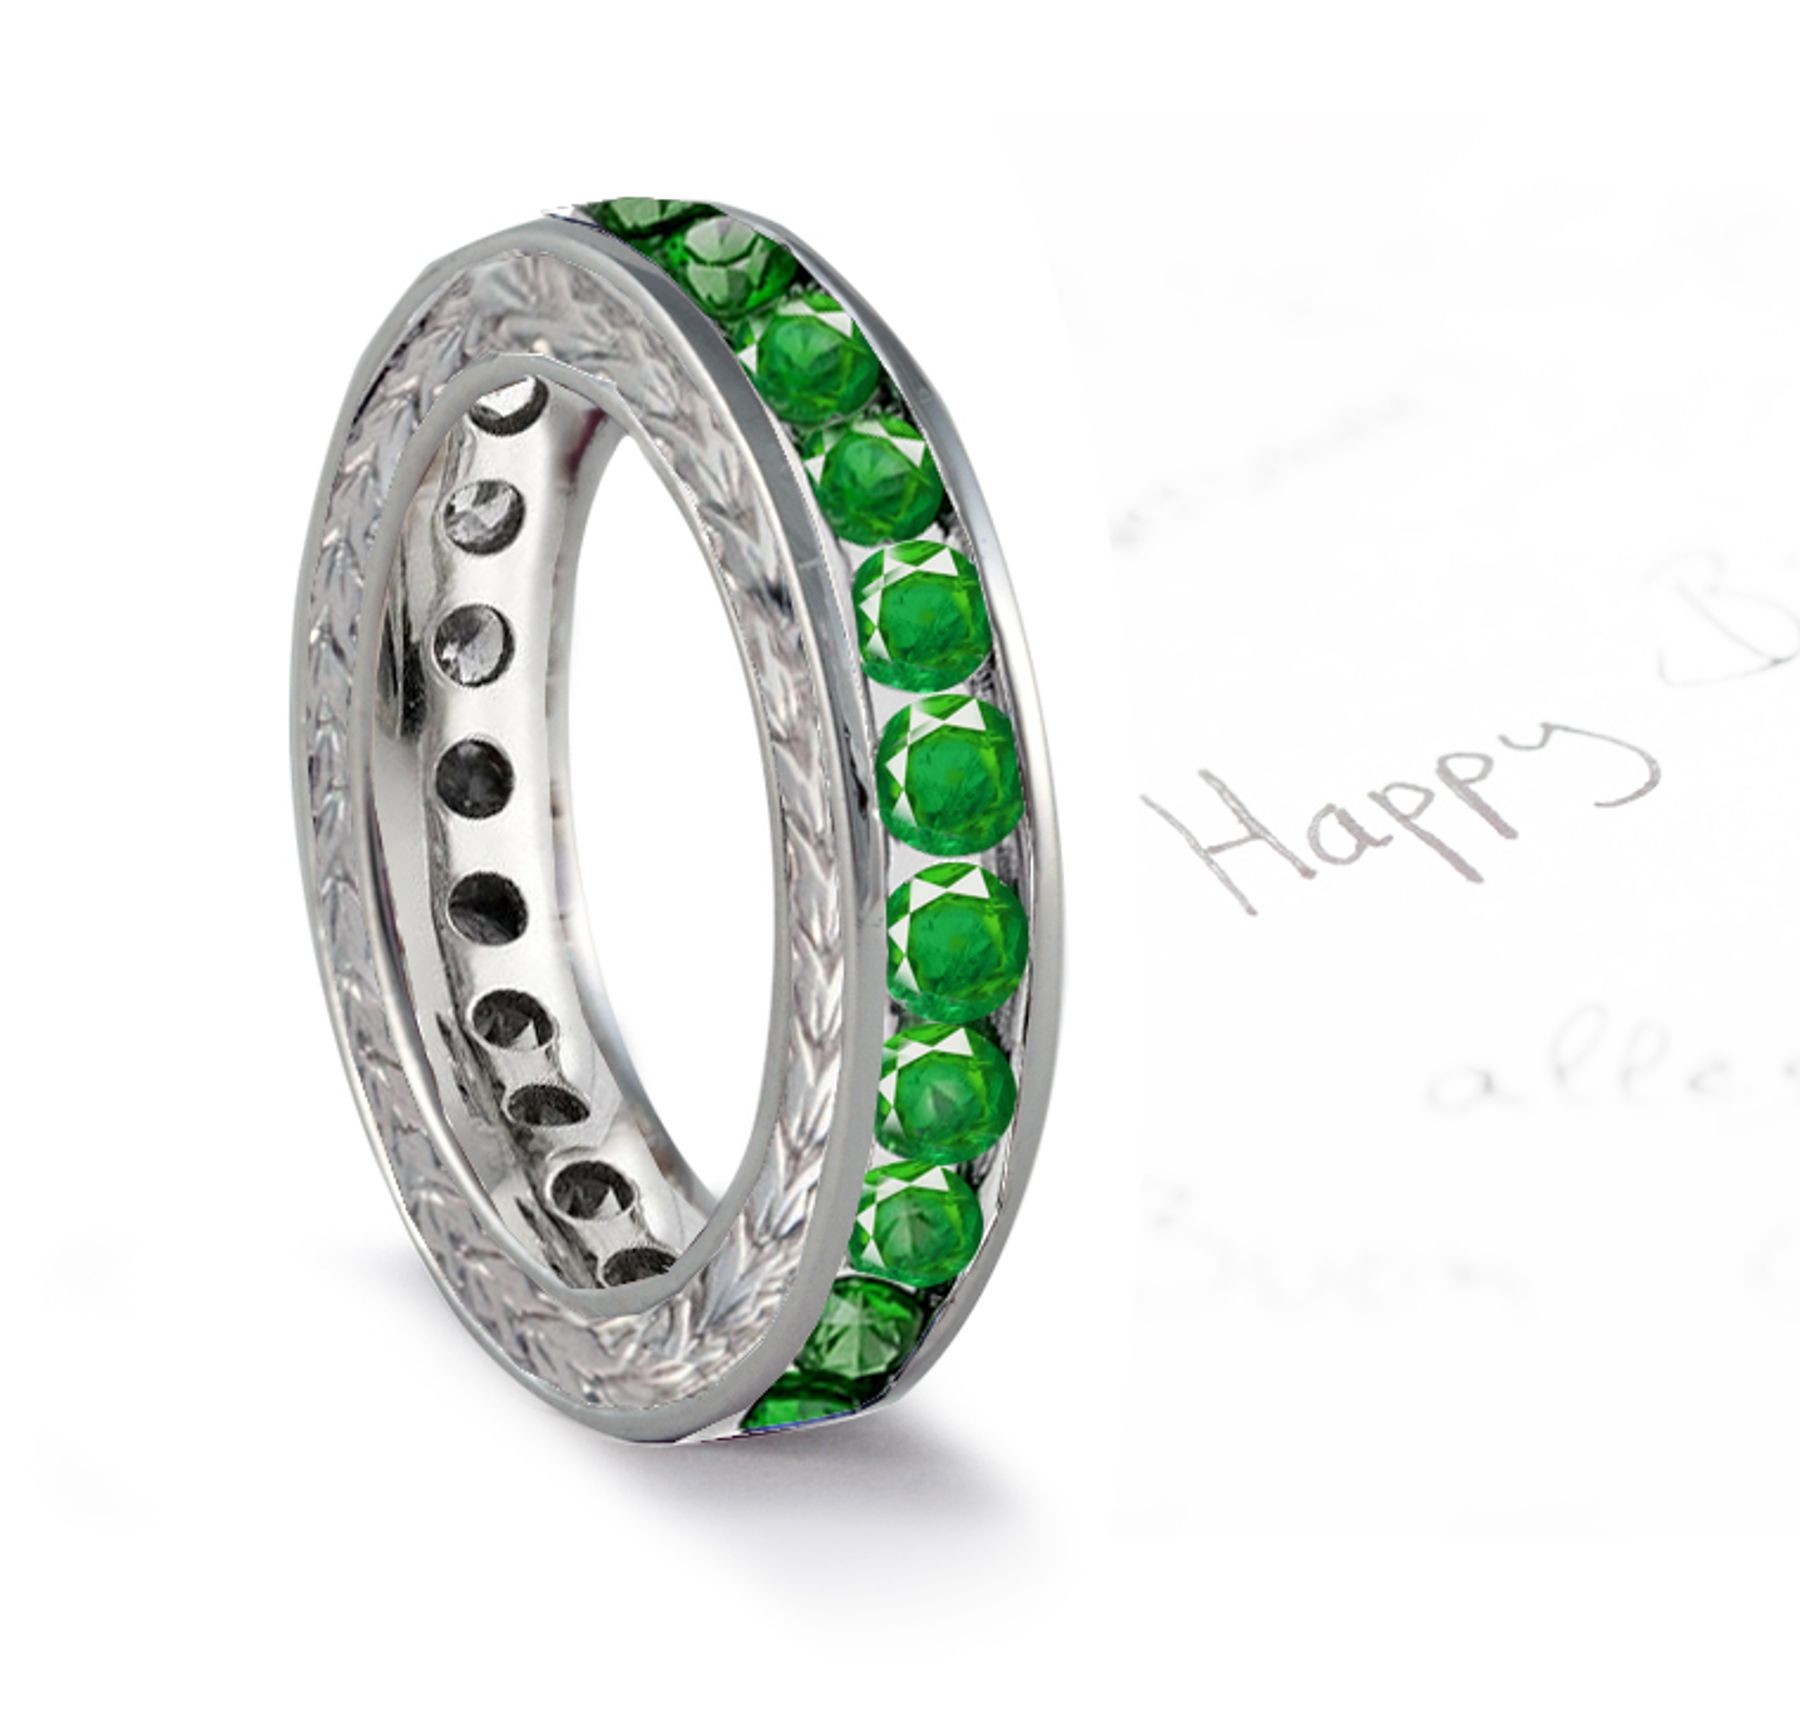 INDIVIDUAL AND UNIQUE: "Special Design" Full Emerald Engraved Band in Star Radiant White Gold